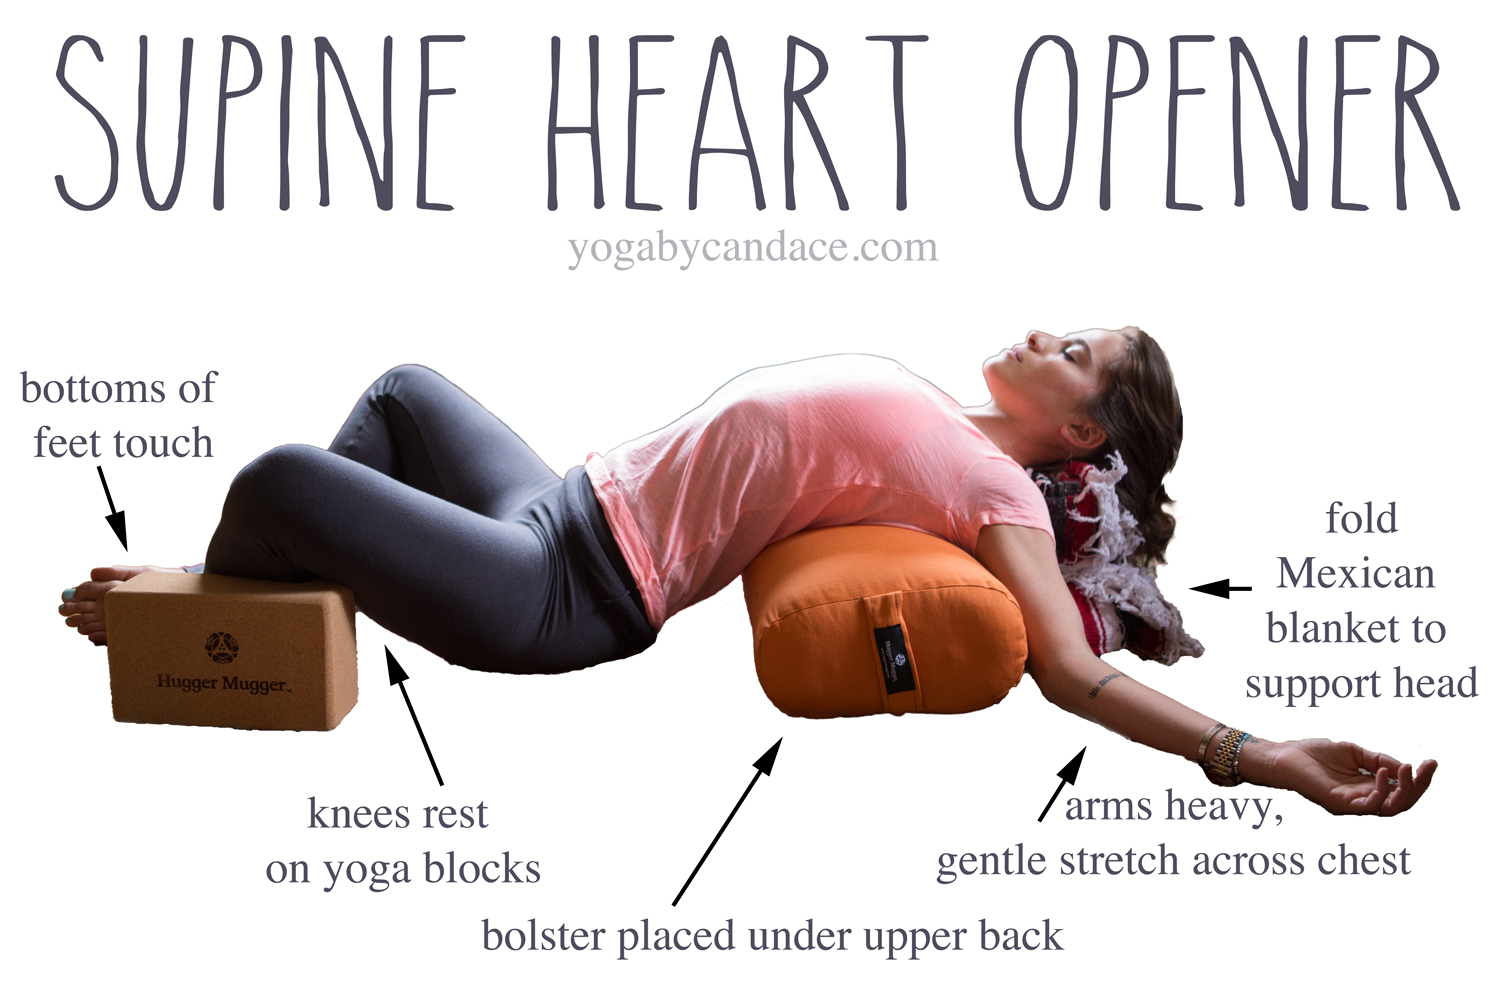 3 Ways to Use Yoga Props for Yin Yoga & A Giveaway! — YOGABYCANDACE